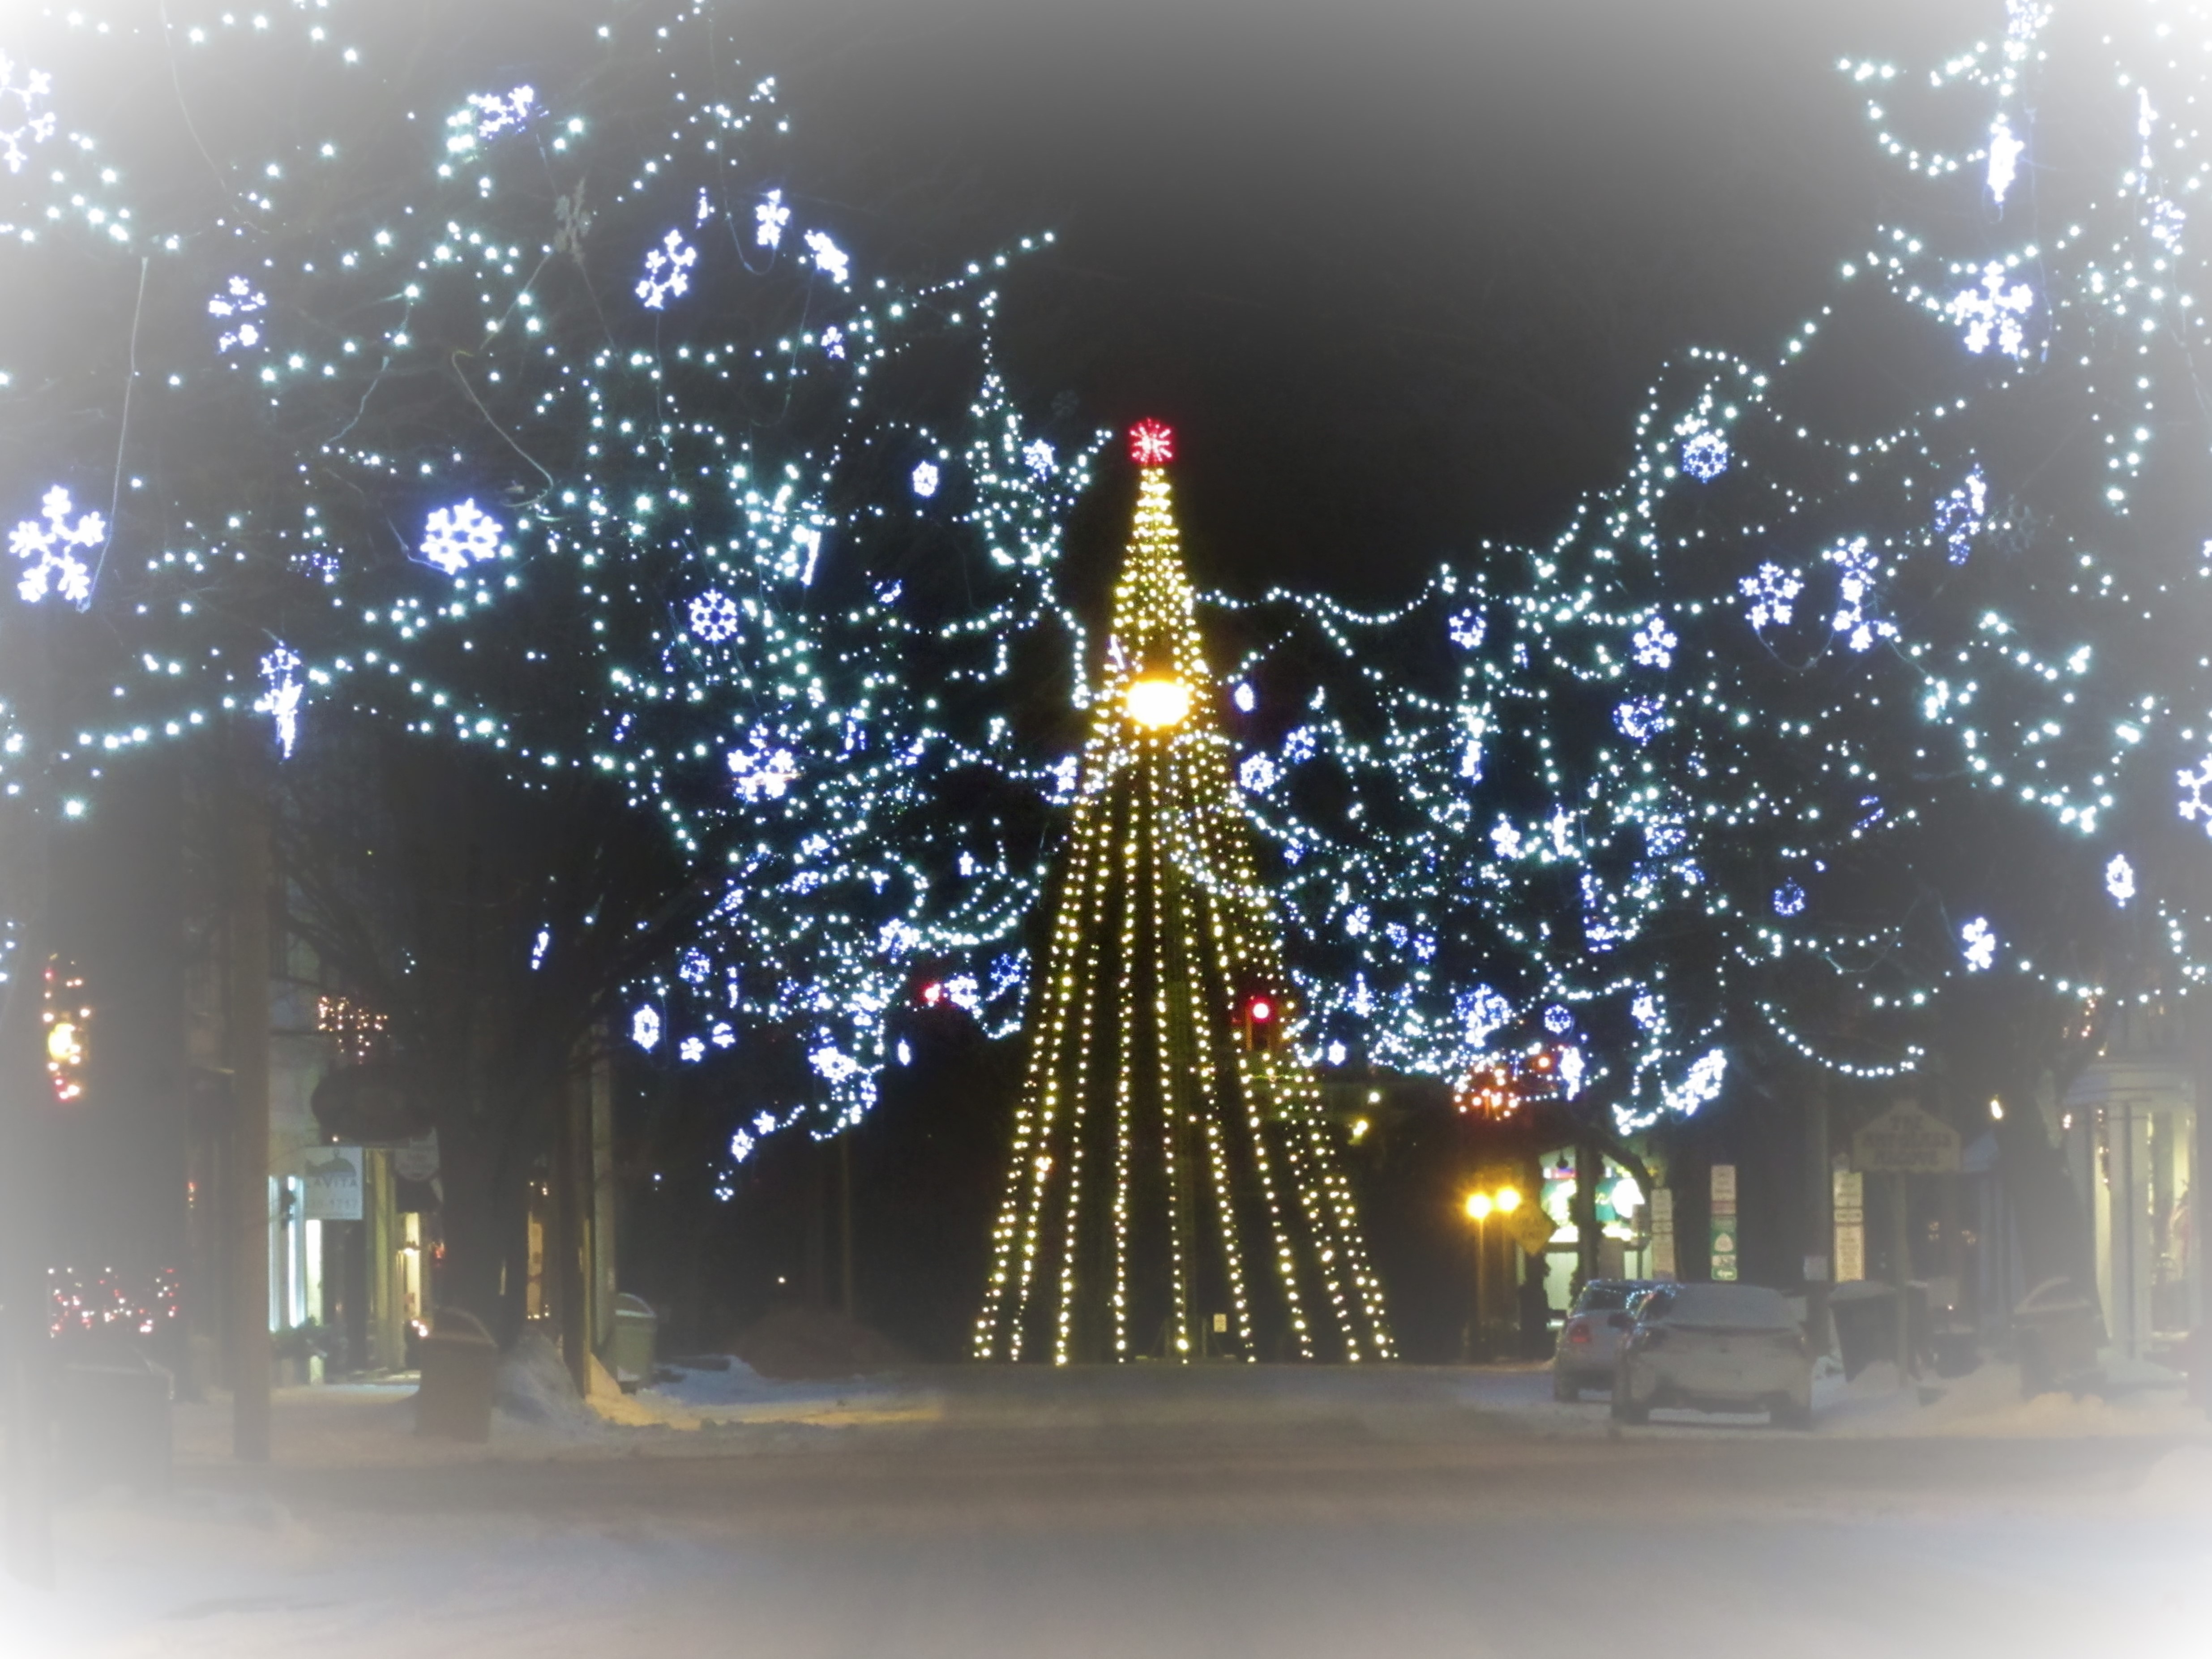 Decorated street underneath a field of lights with snowflake lights interspersed among the field that frames a tall string light tree with red snowflake top. 